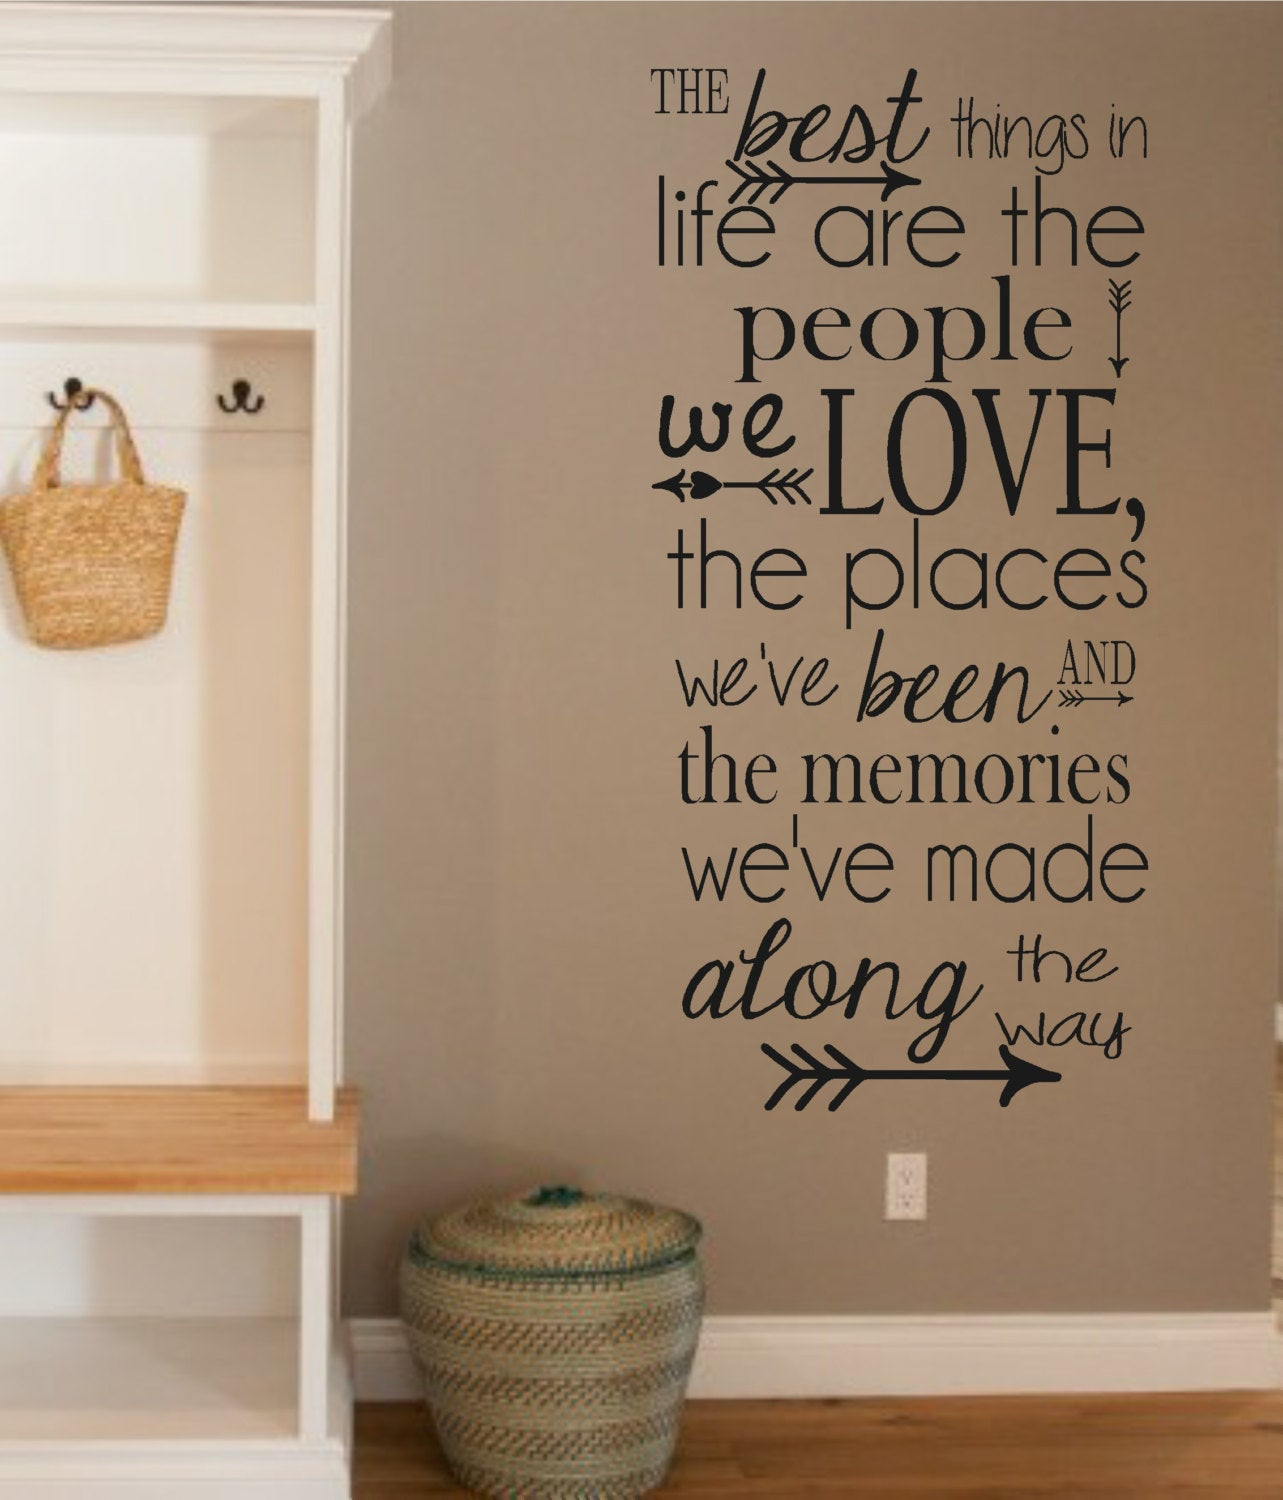 Wall Quotes For Living Room
 Vinyl Wall Decal The Best Things in Life People Love